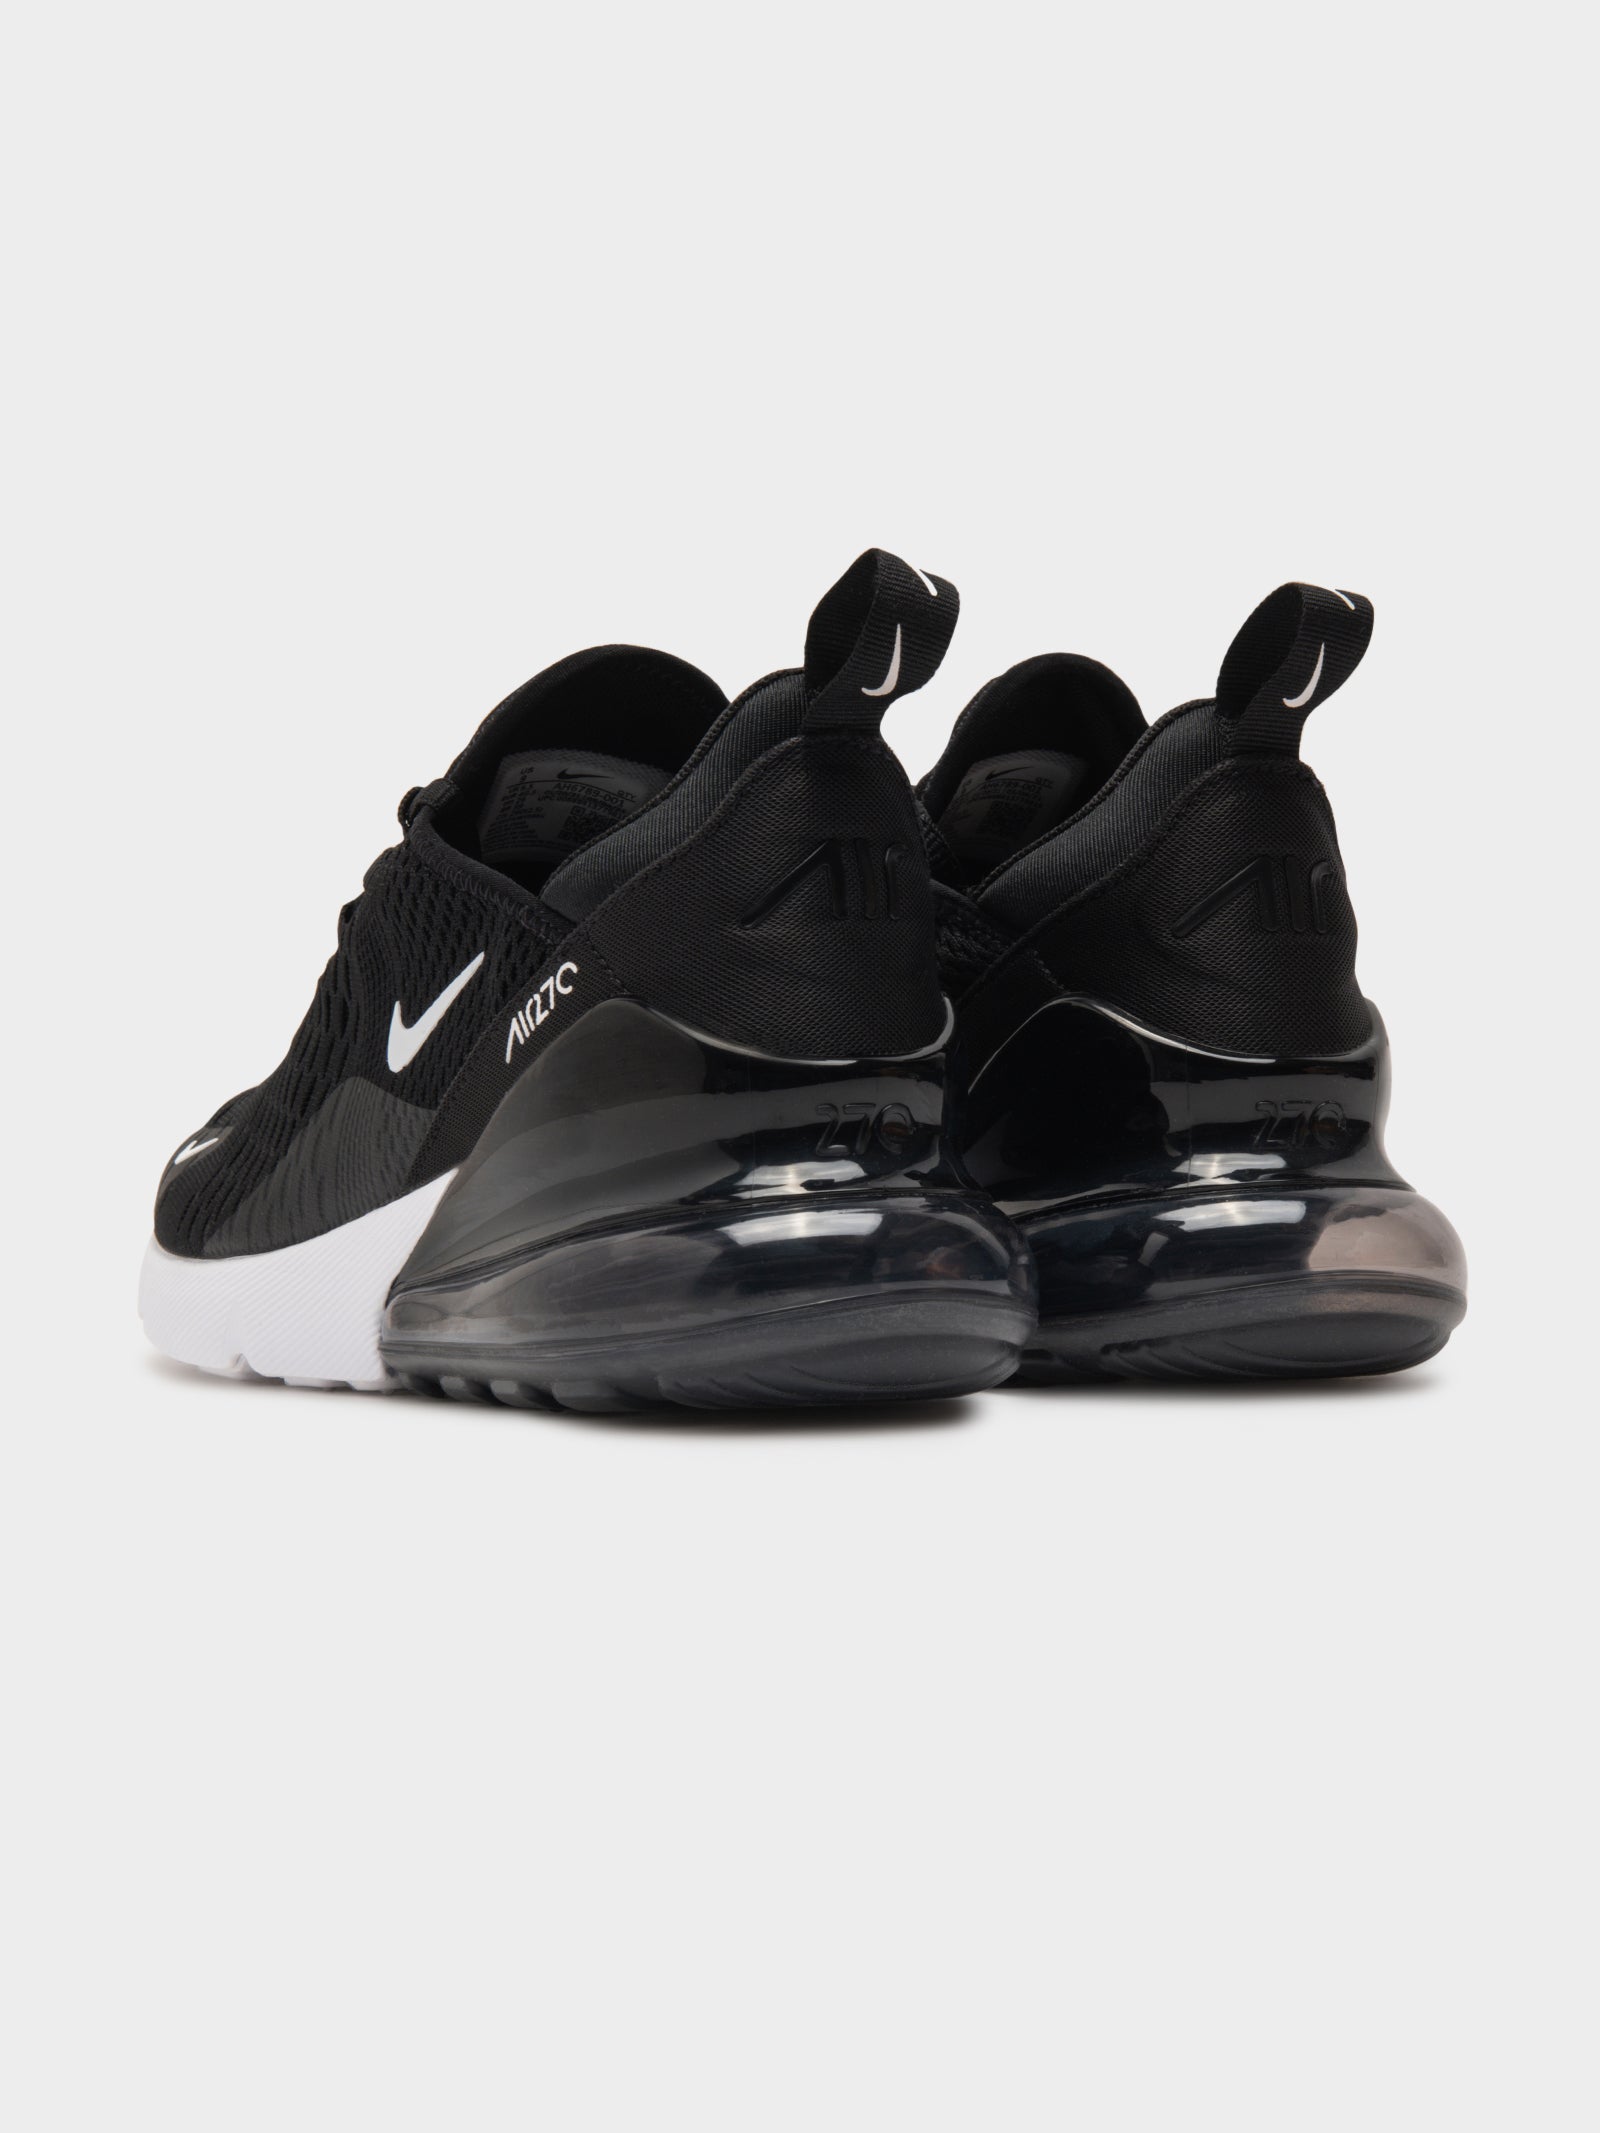 Womens Air Max 270 Sneakers in Black & White